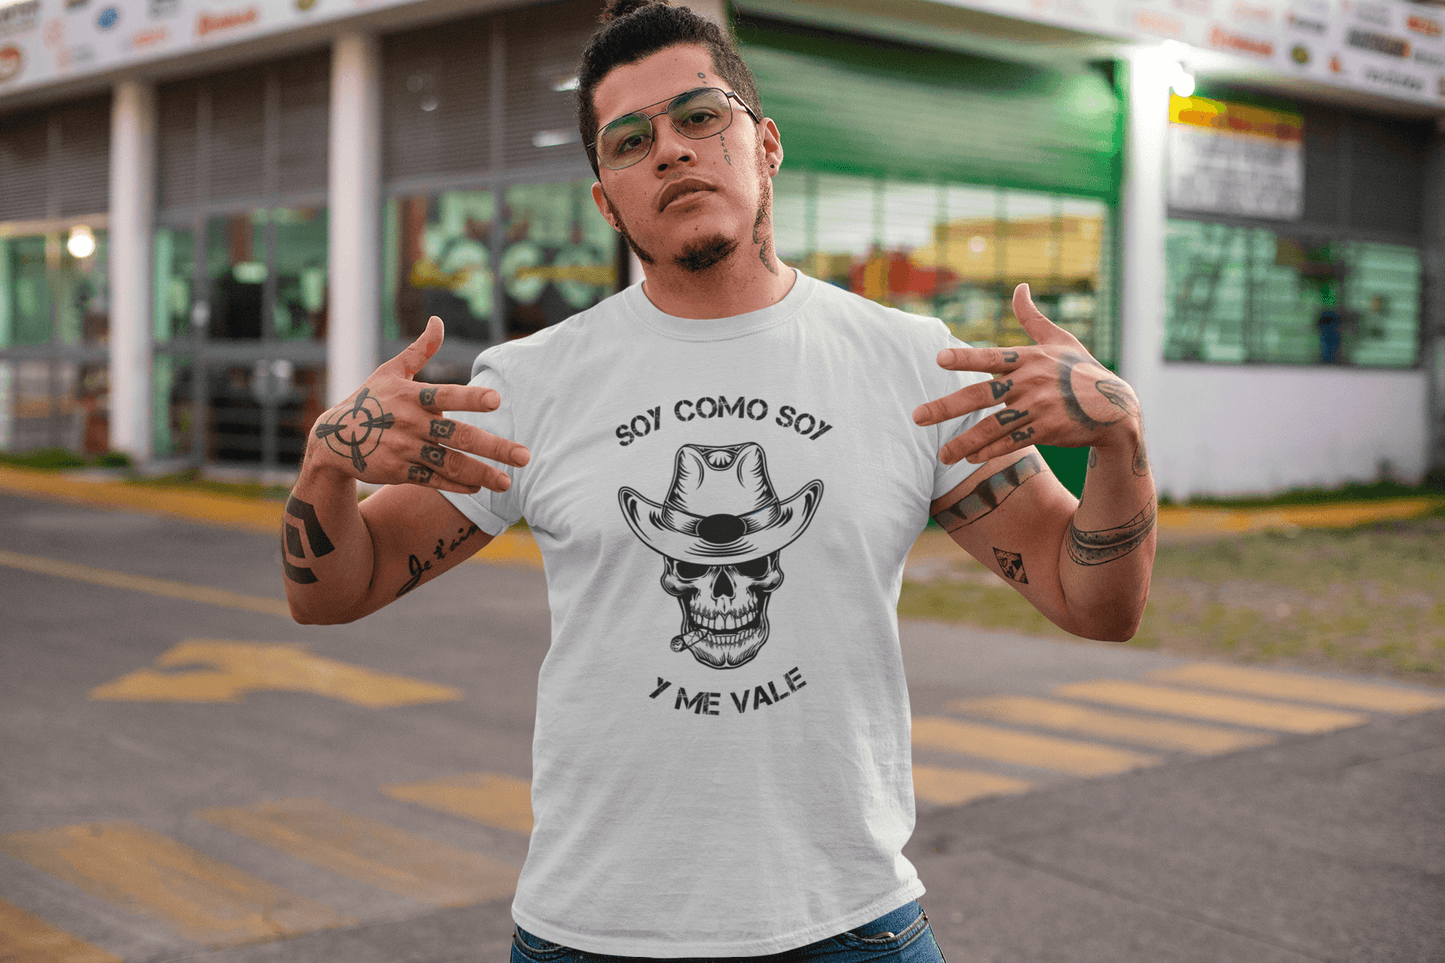 Light Gray t-shirt with black text and design that reads, "Soy Como Soy Y Me Vale" and contains a skull with cowboy hat. It is available in sizes SM-4XL at www.sanchezhere.com